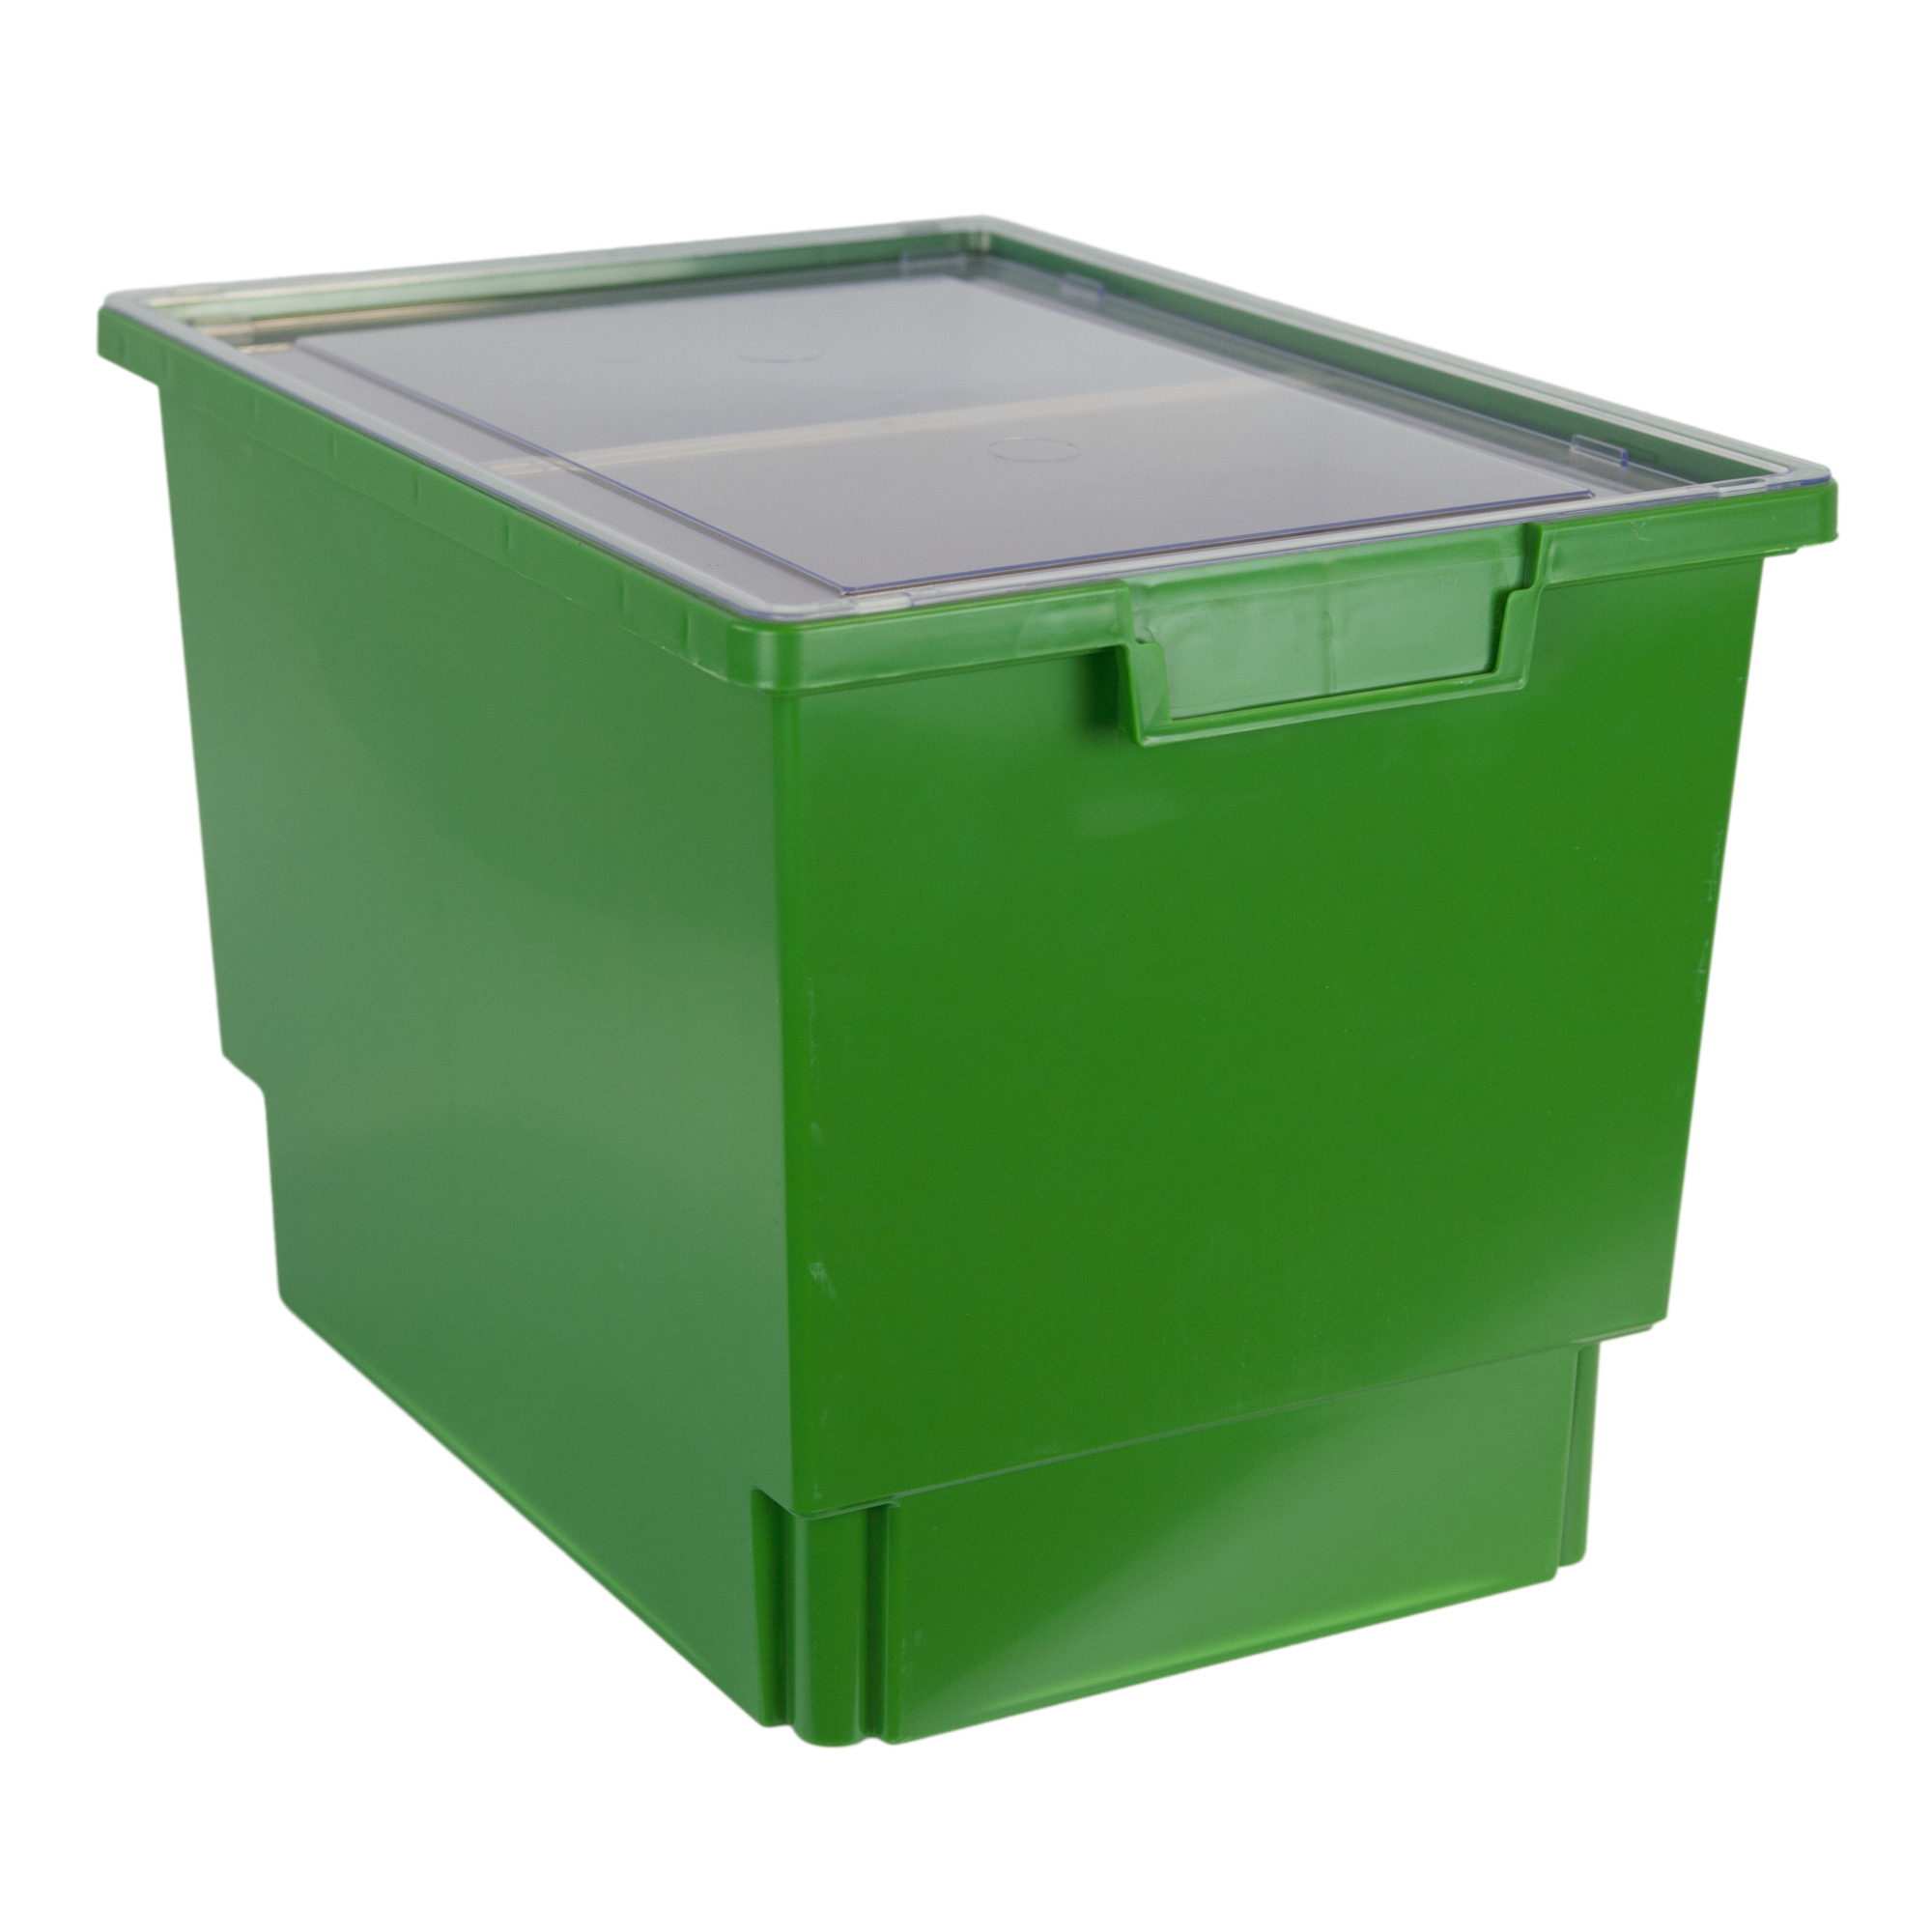 Certwood StorWerks, Slim Line 12Inch Tray Kit (2 x Divisions) Green, Included (qty.) 1, Material Plastic, Height 12 in, Model CE1954PG-NK0404-1